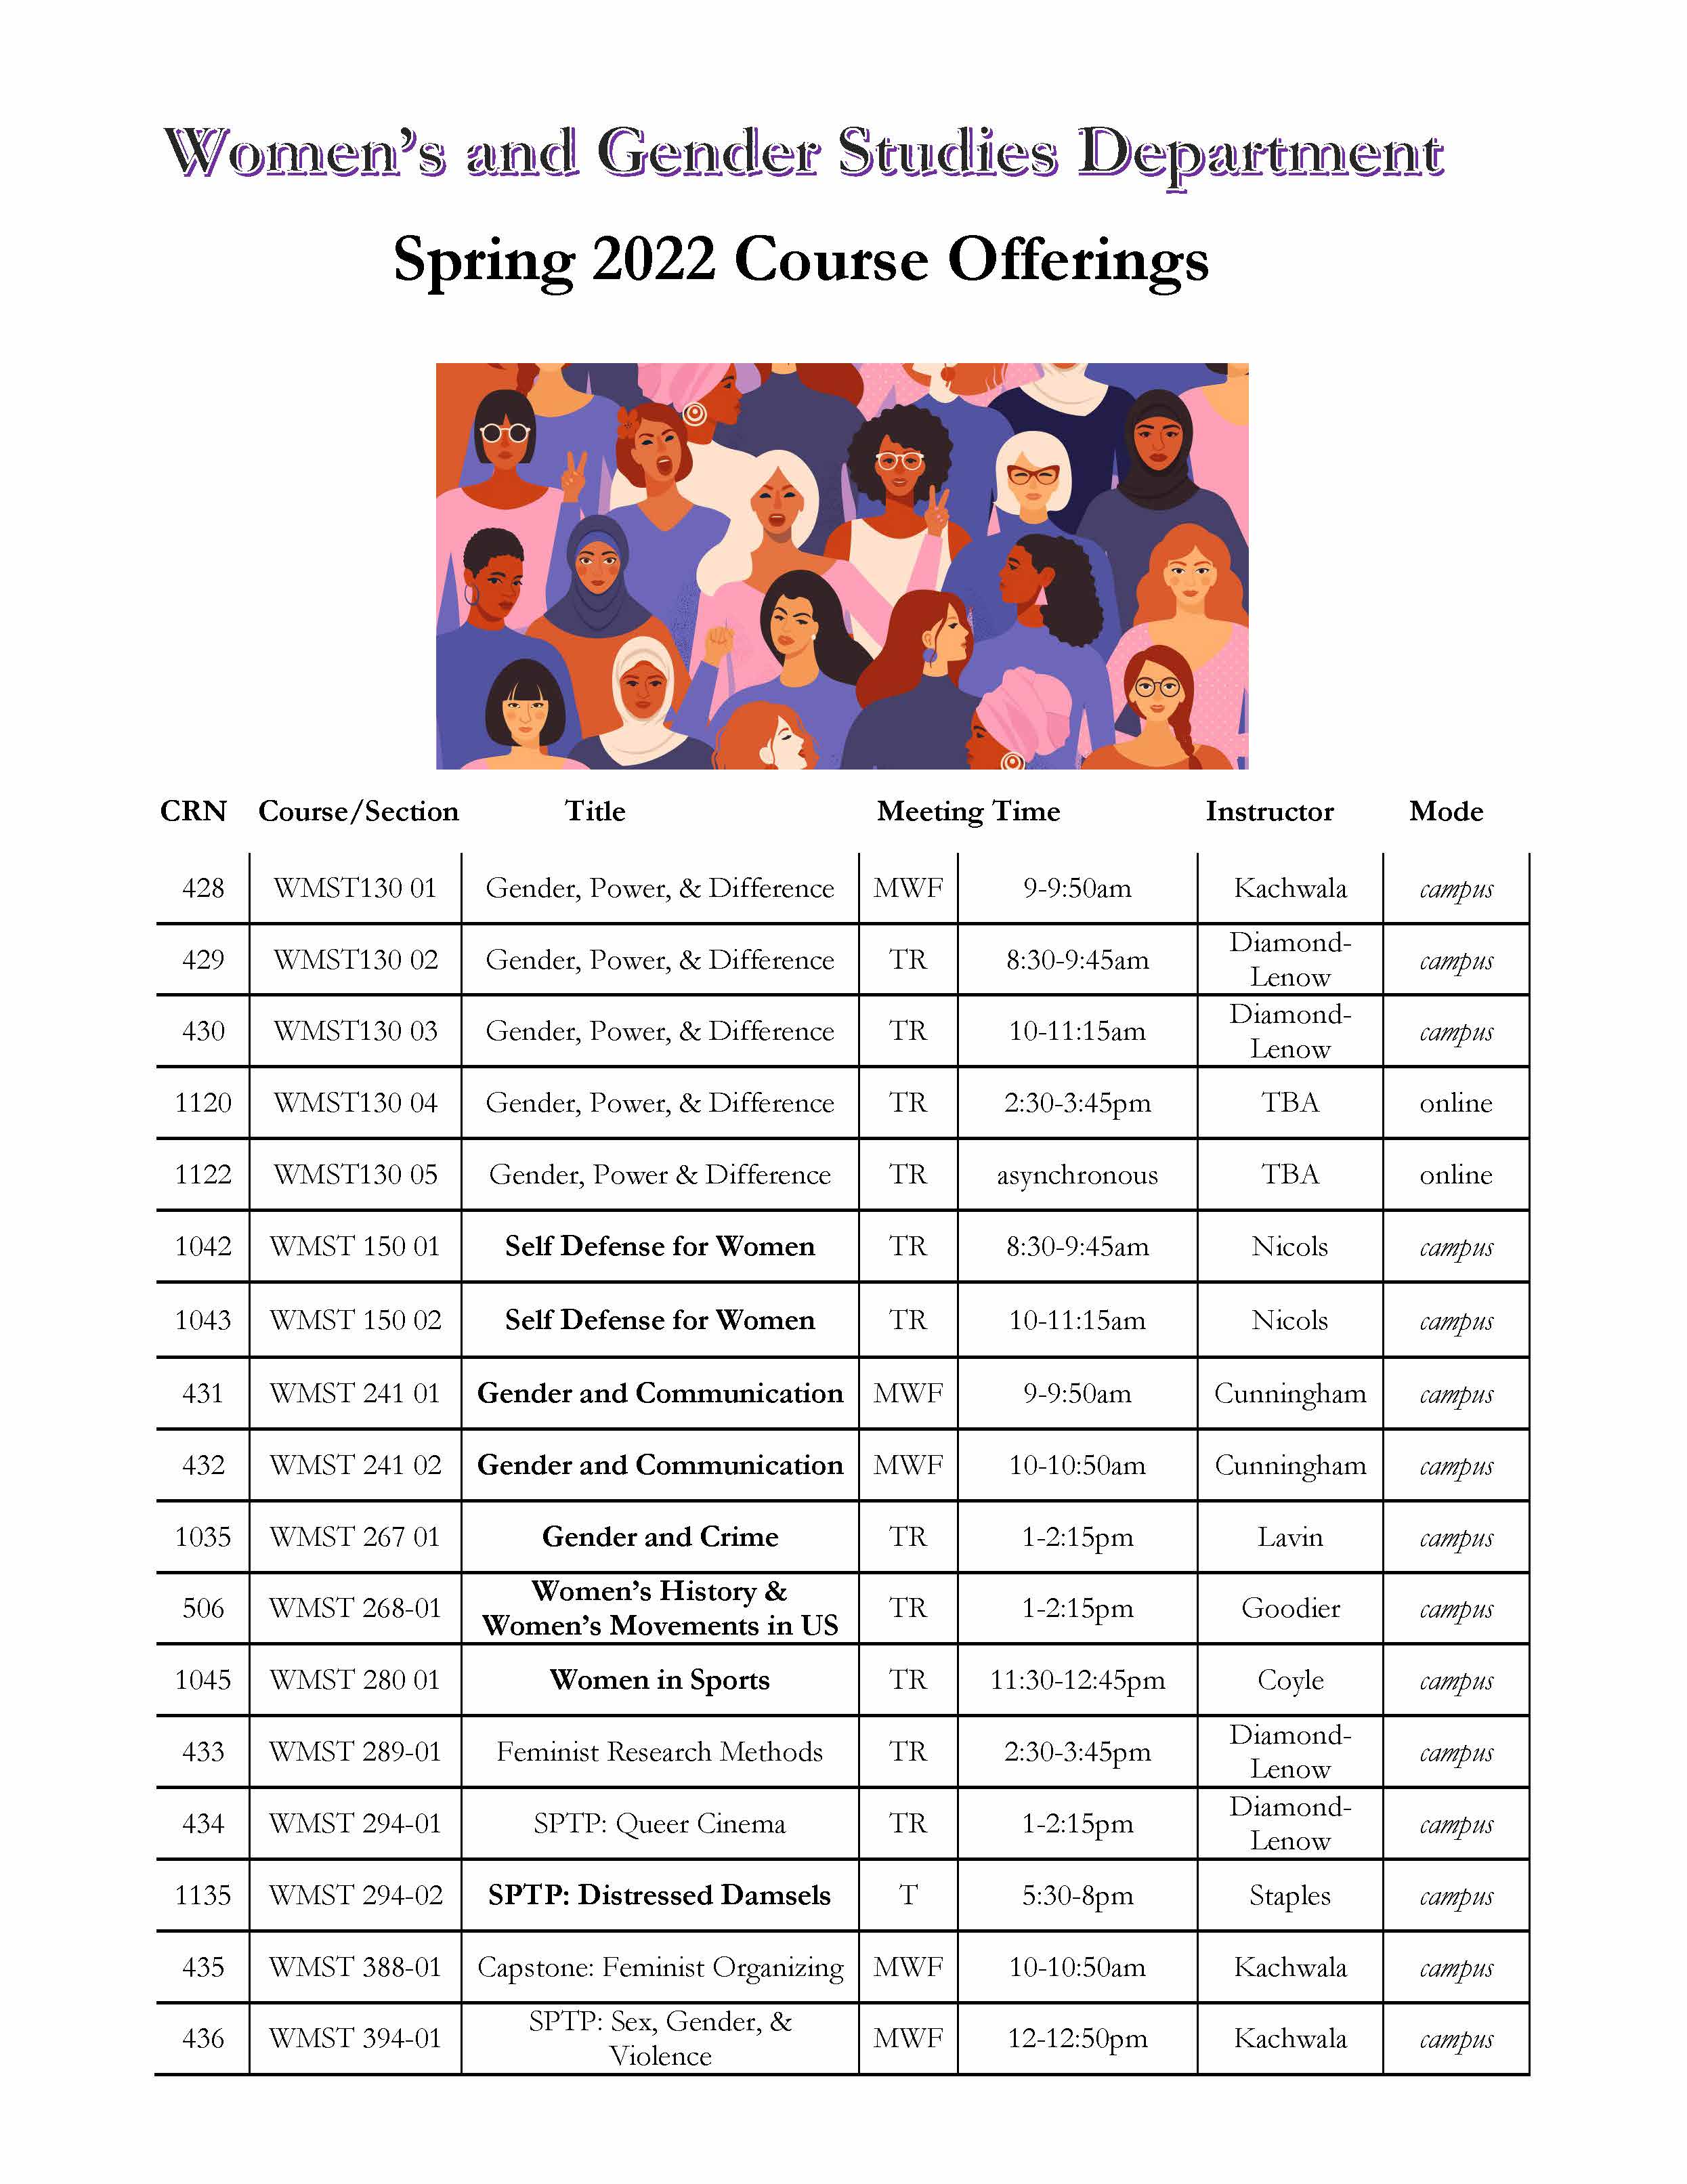 Spring 2022 course listing